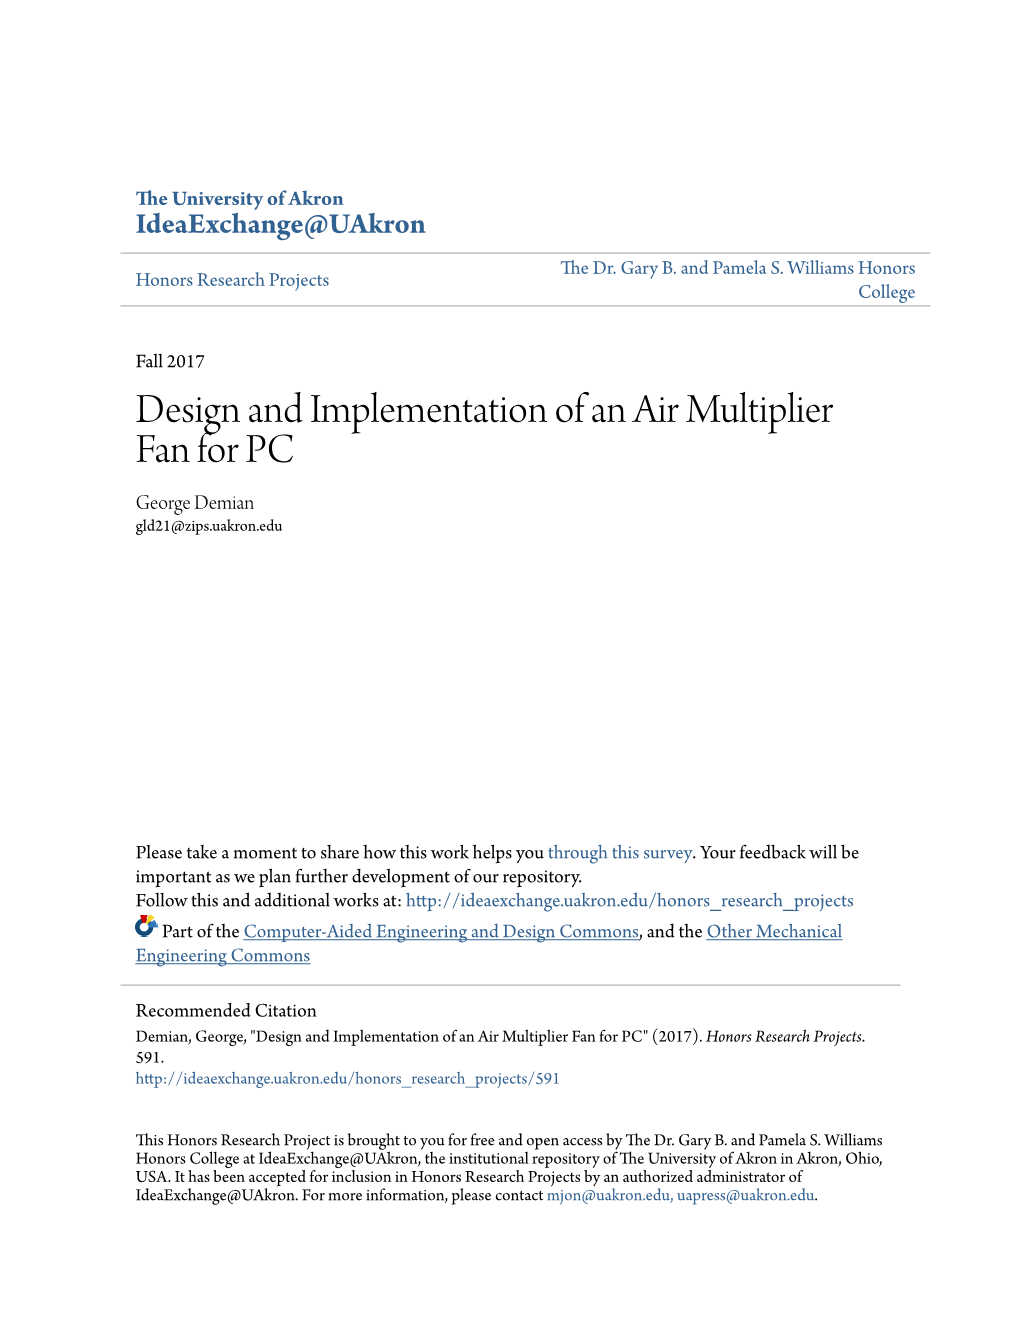 Design and Implementation of an Air Multiplier Fan for PC George Demian Gld21@Zips.Uakron.Edu